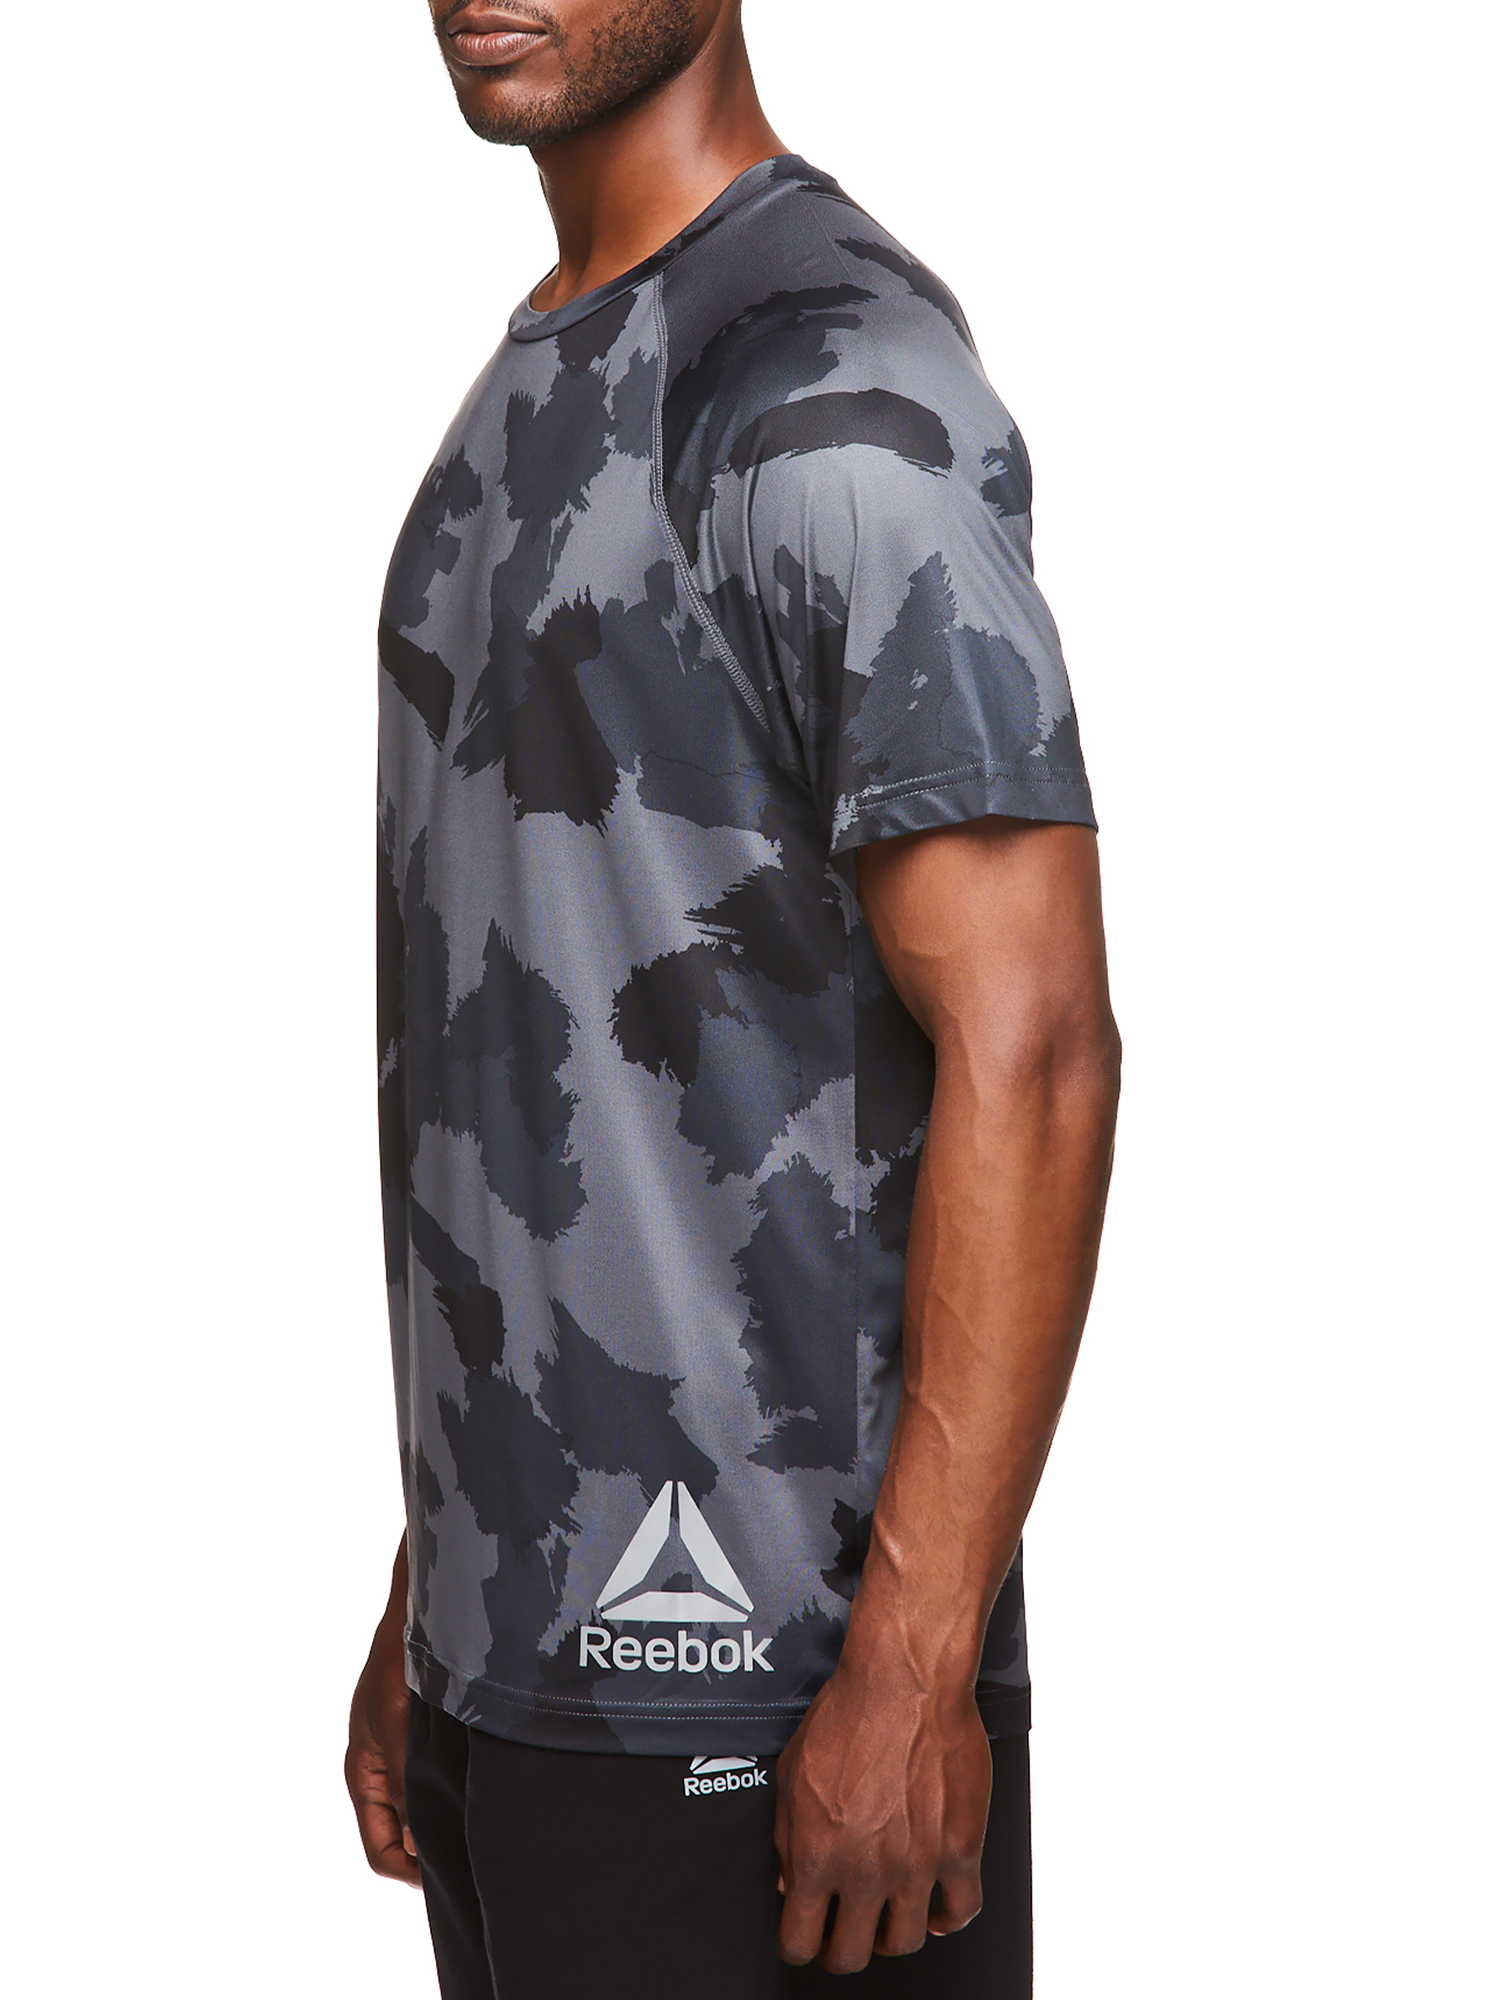 Reebok Men's and Big Men's Active Short Sleeve Duration Performance Tee, up to Size 3XL - image 4 of 4